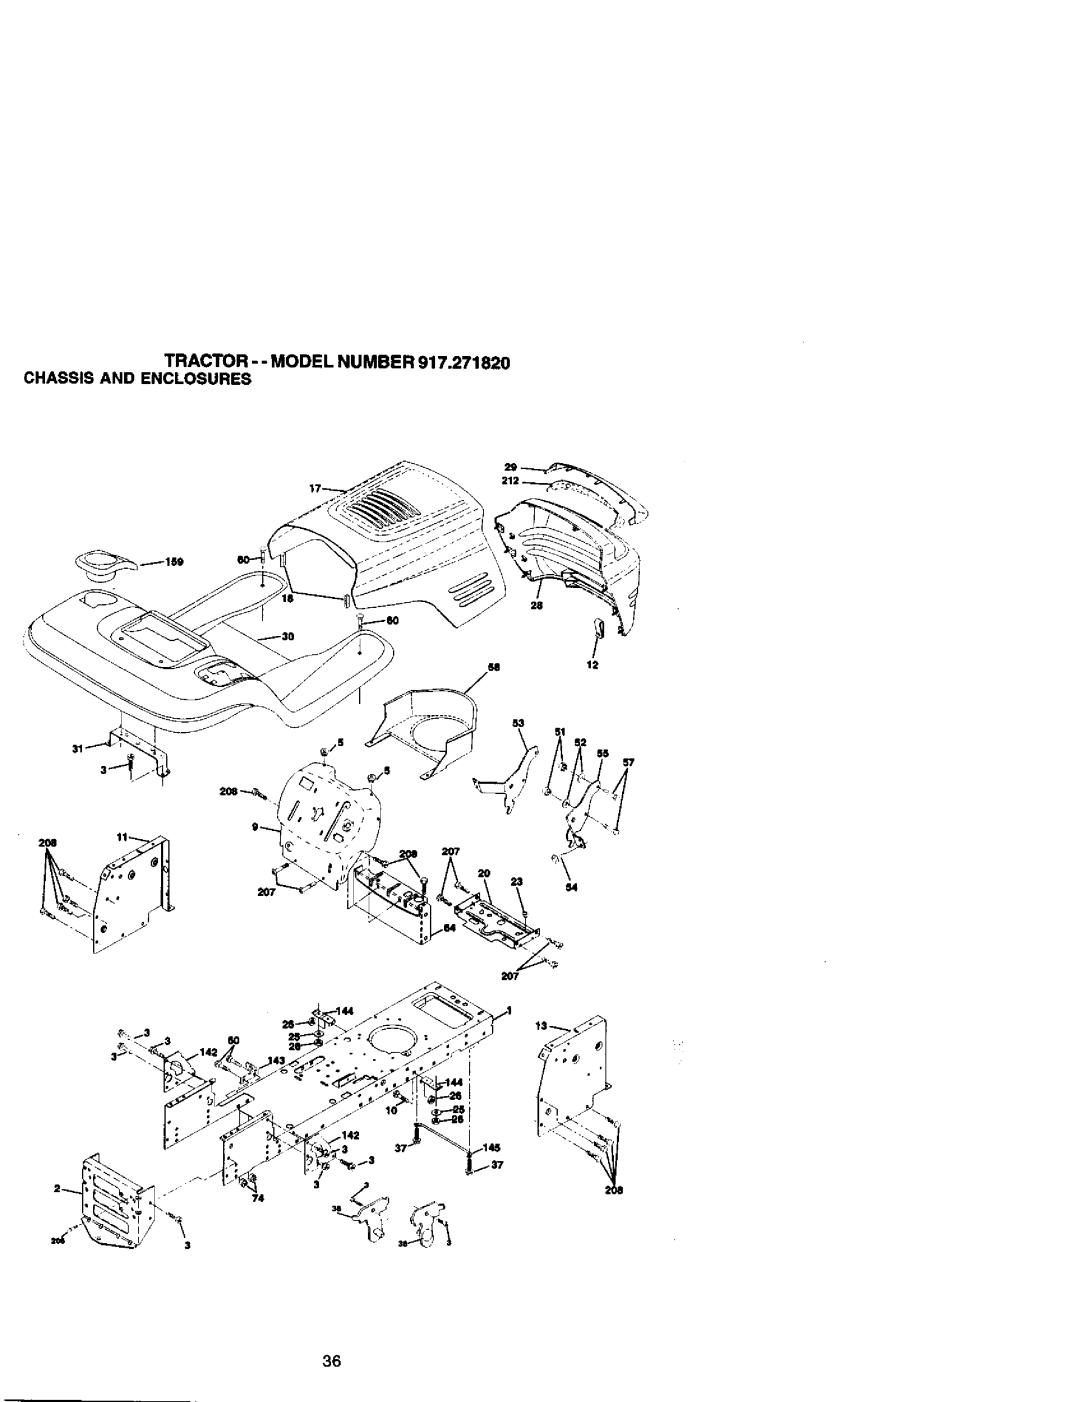 Craftsman 917.27182 manual Tractor - - Model Number Chassis And Enclosures 